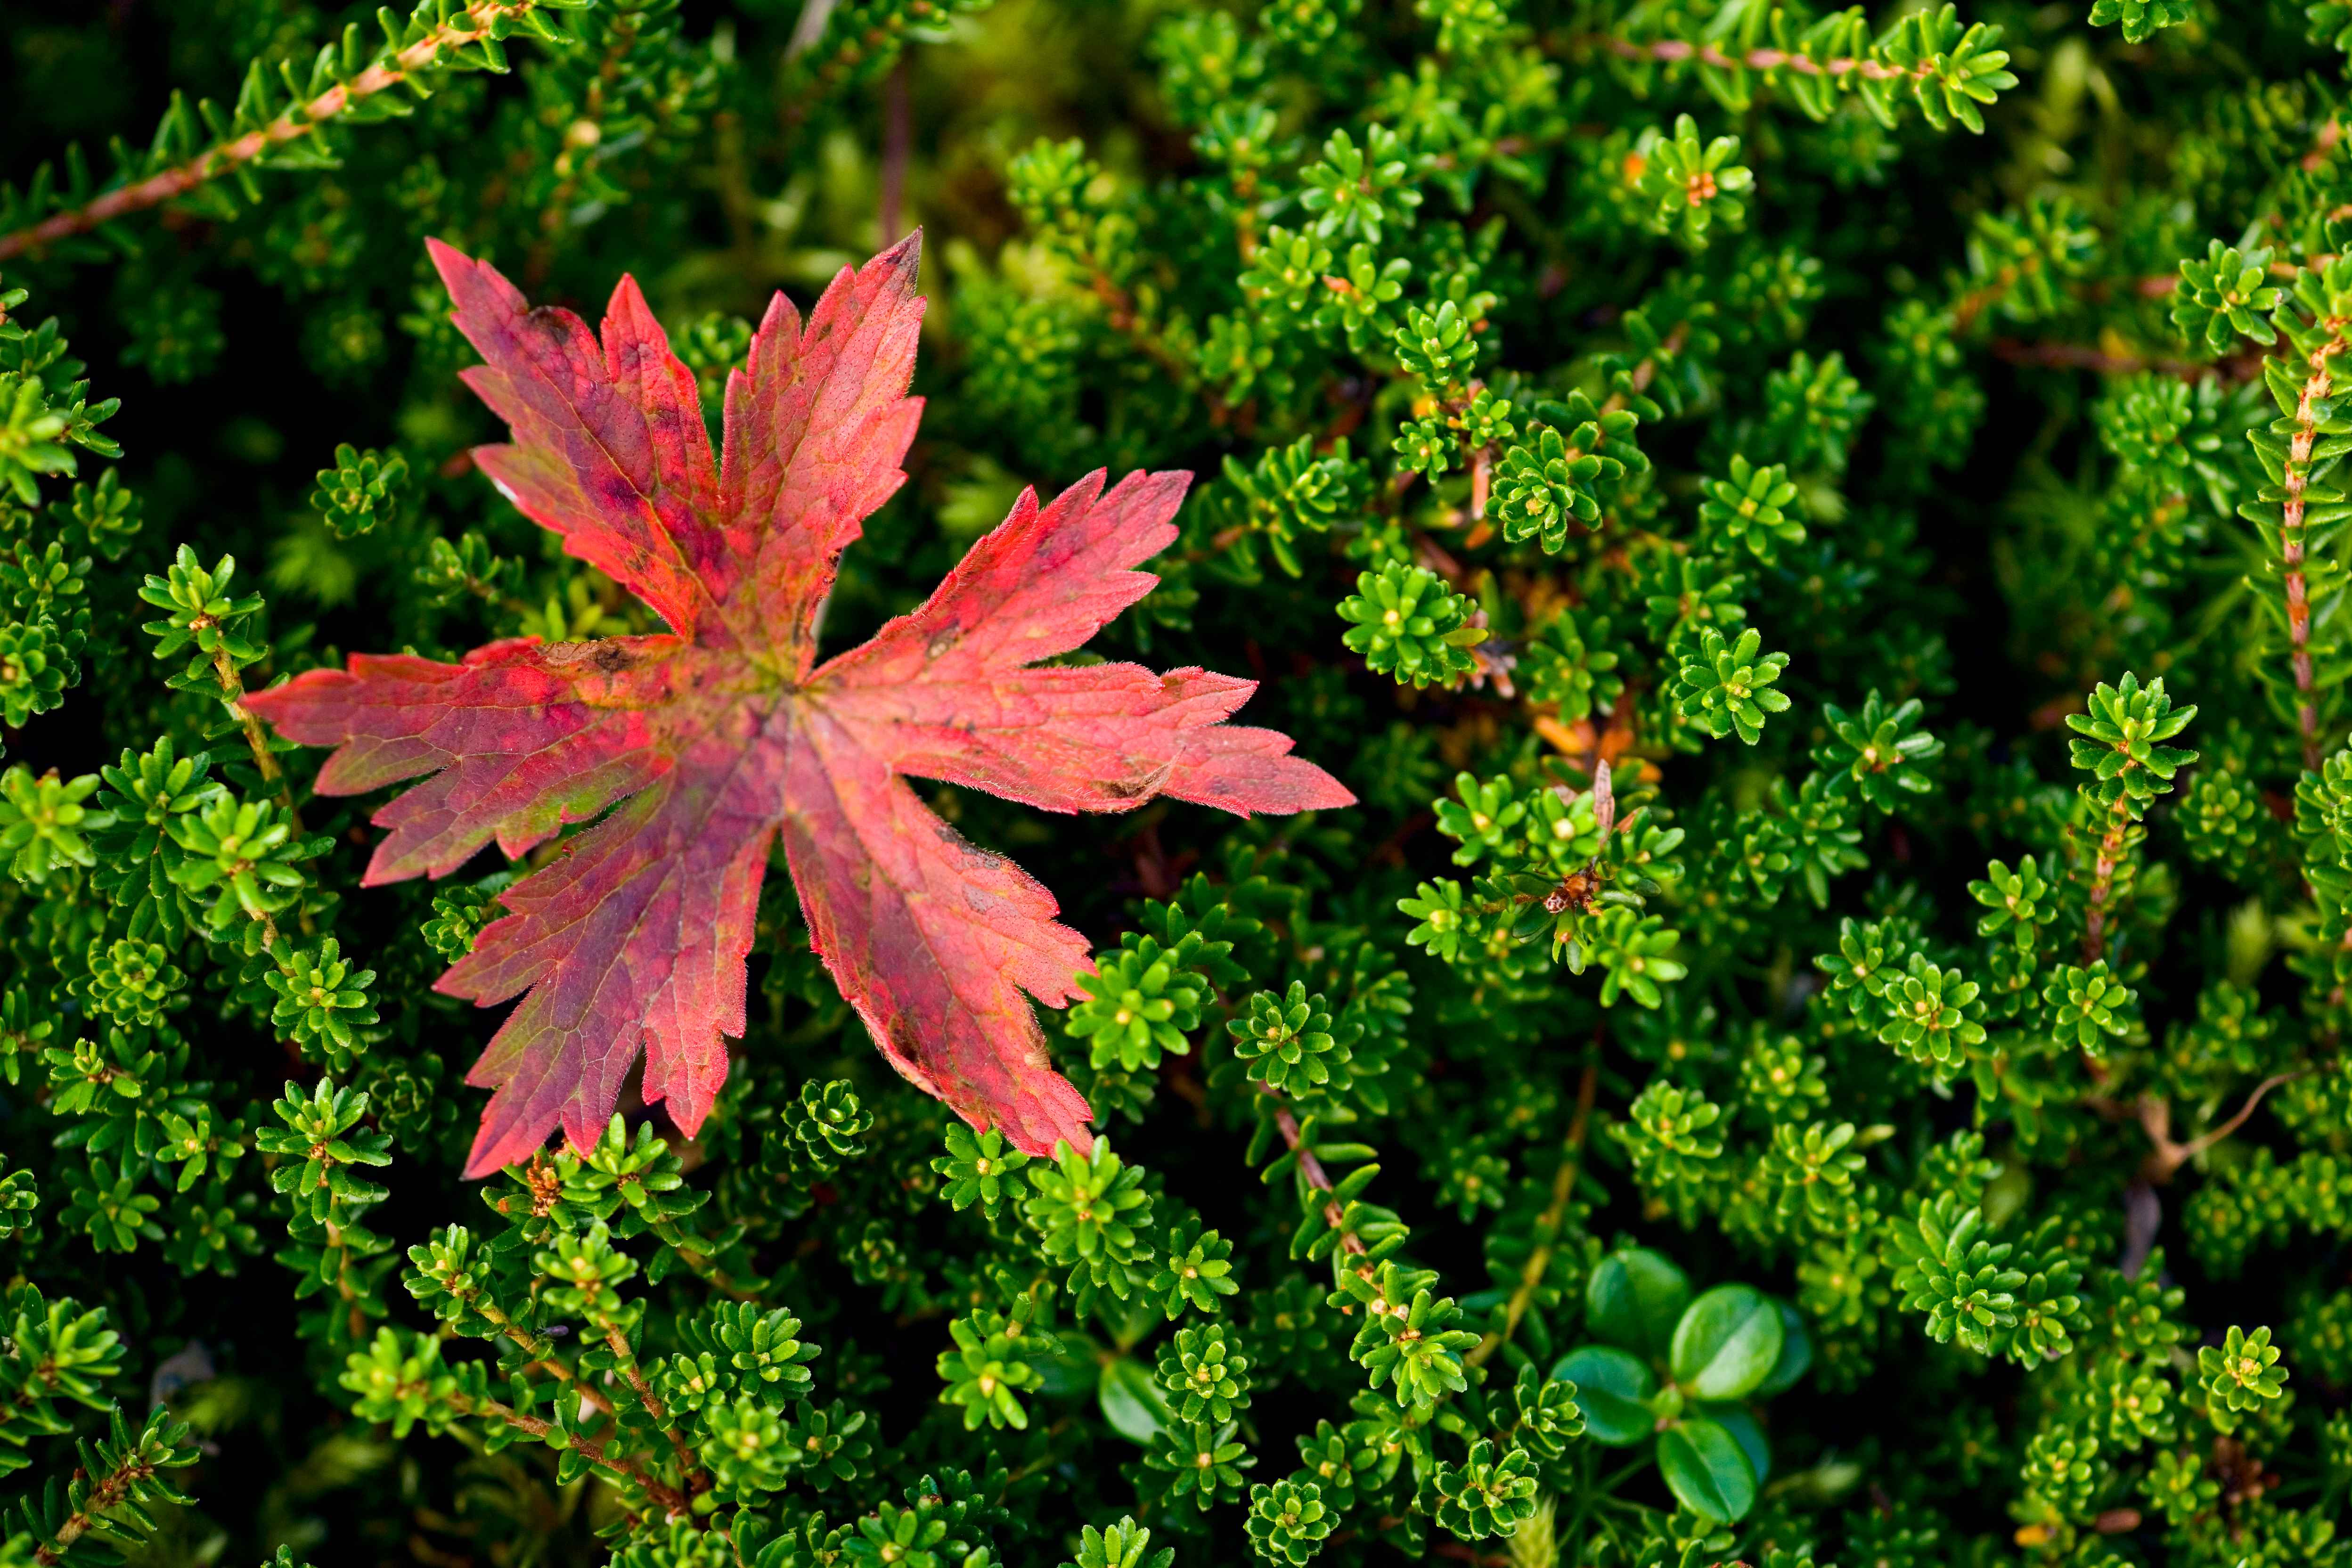 File:A red leaf stands out against lively green plants.jpg ...